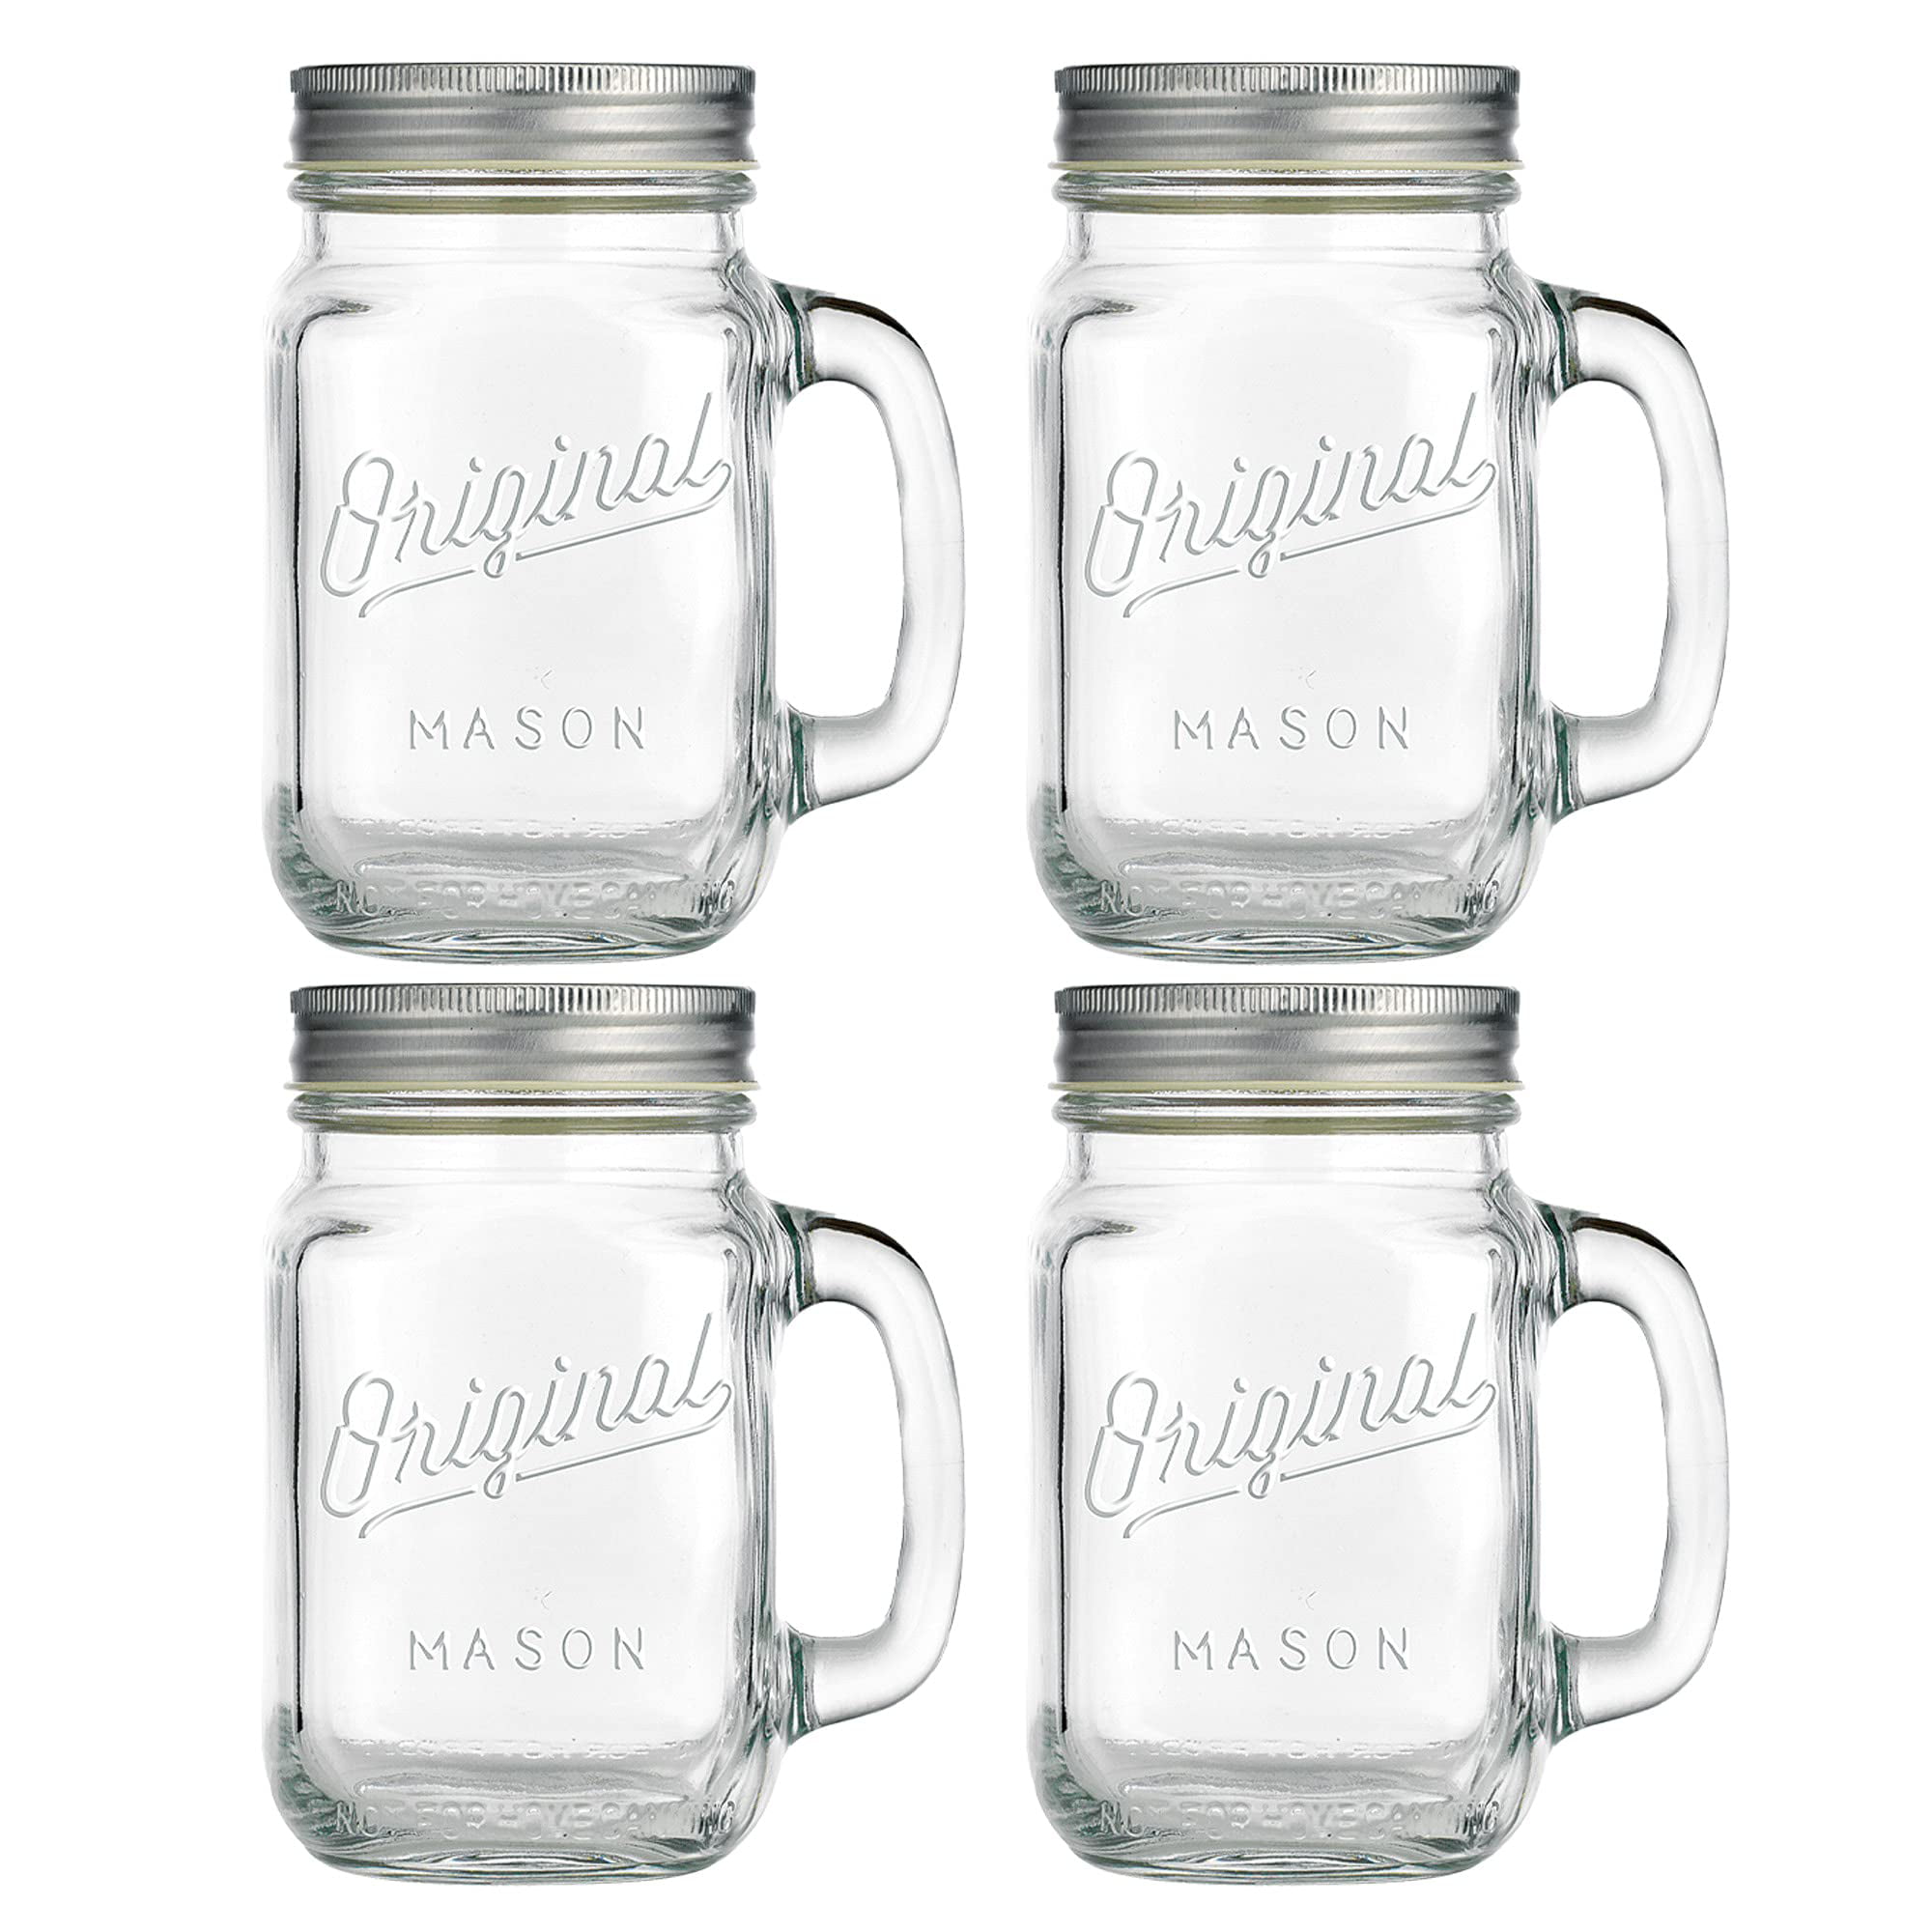 350ml Mason Jar Mugs With Handles Old Fashioned Glass Bottle Juice Drink  Glass Water Bottle With Cover Straw Бутылка Для Воды - Glass - AliExpress